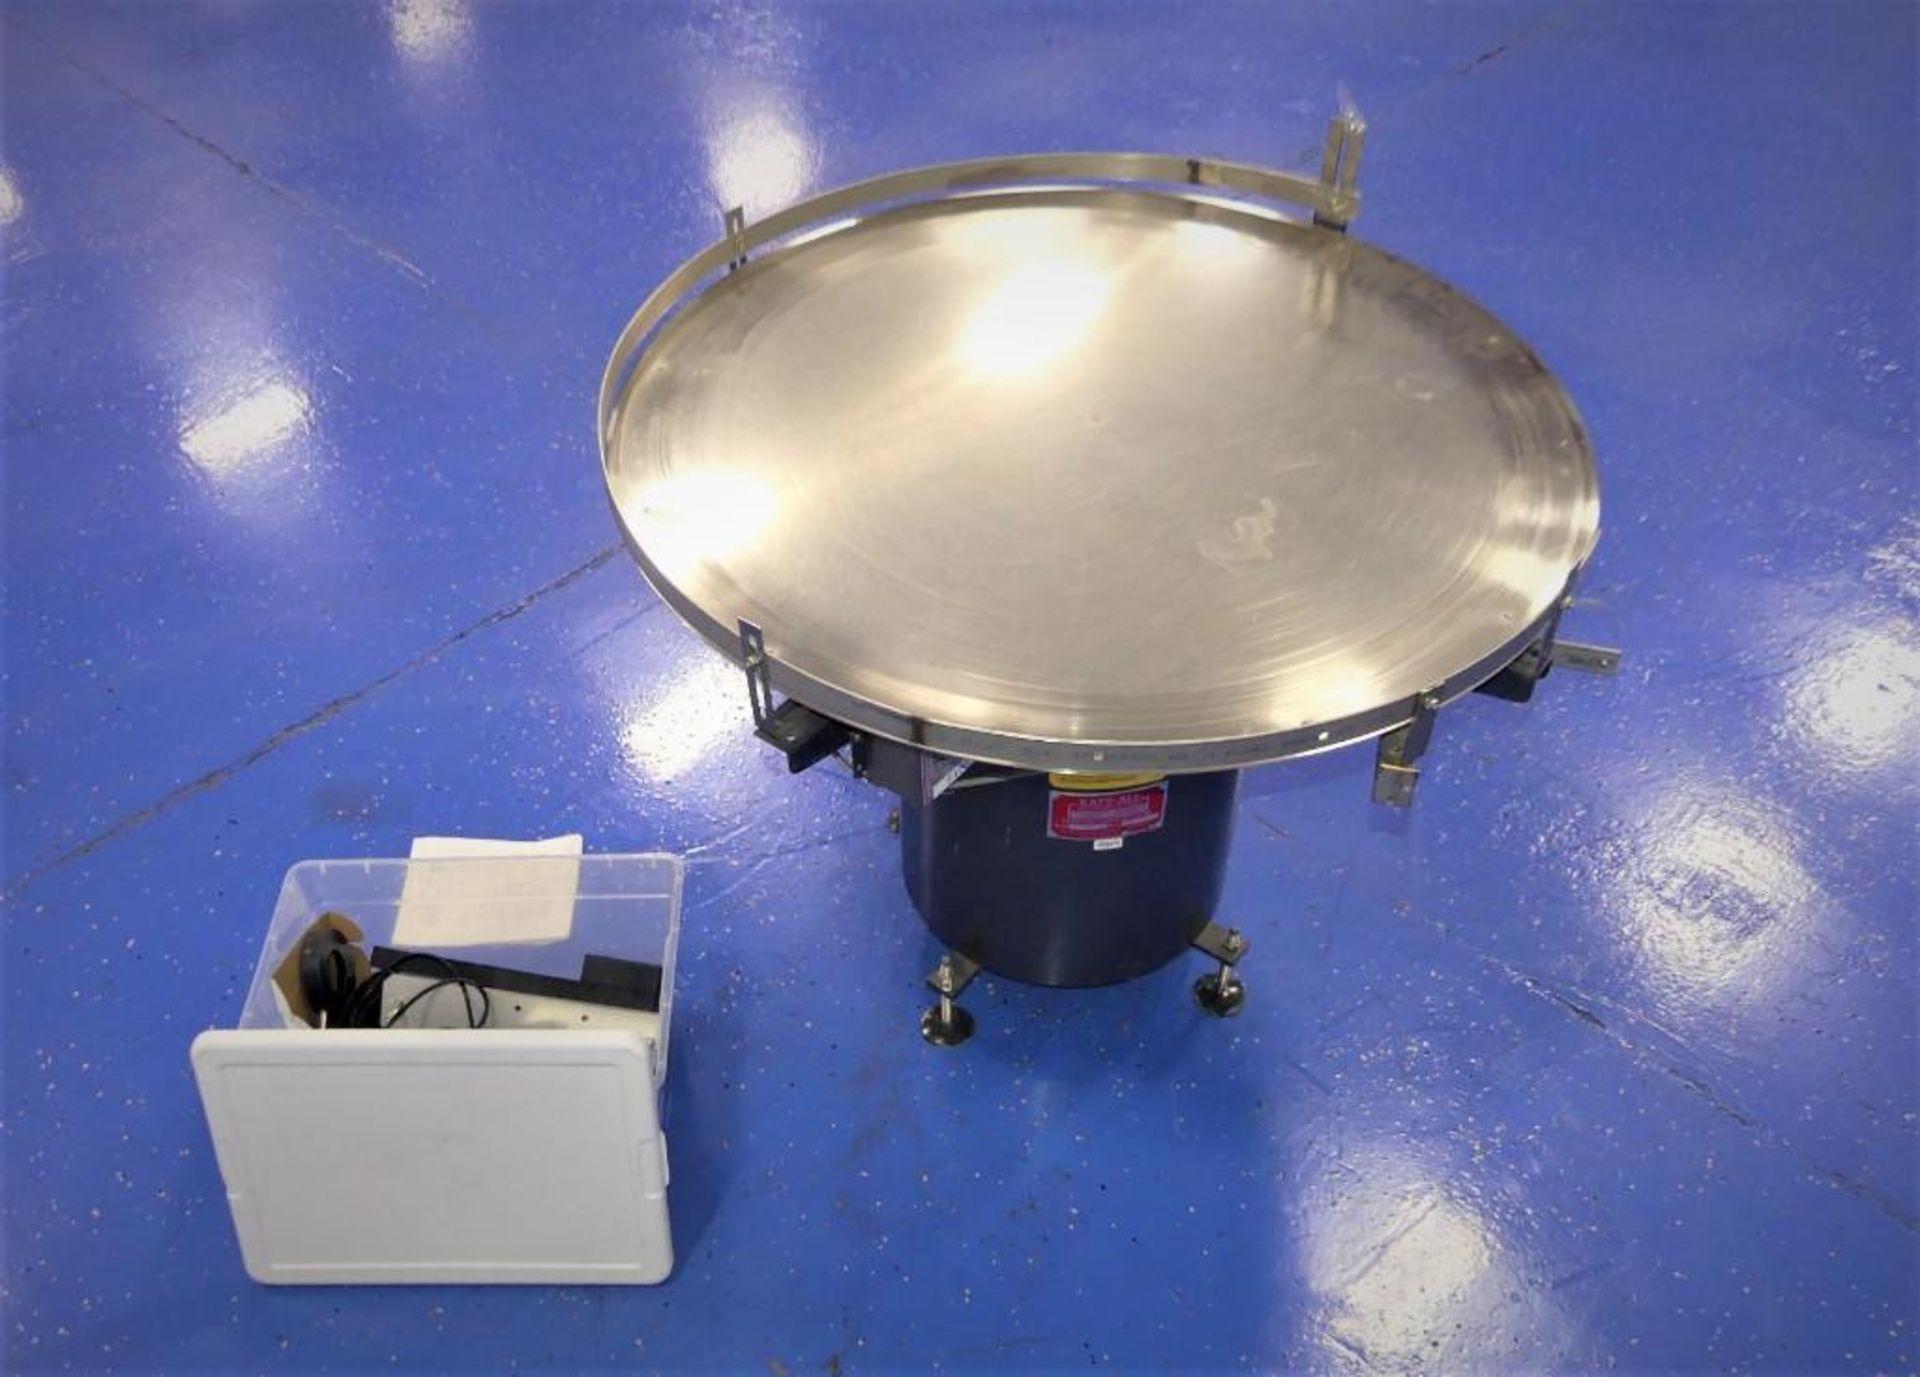 48" Rotary Accumulation Table